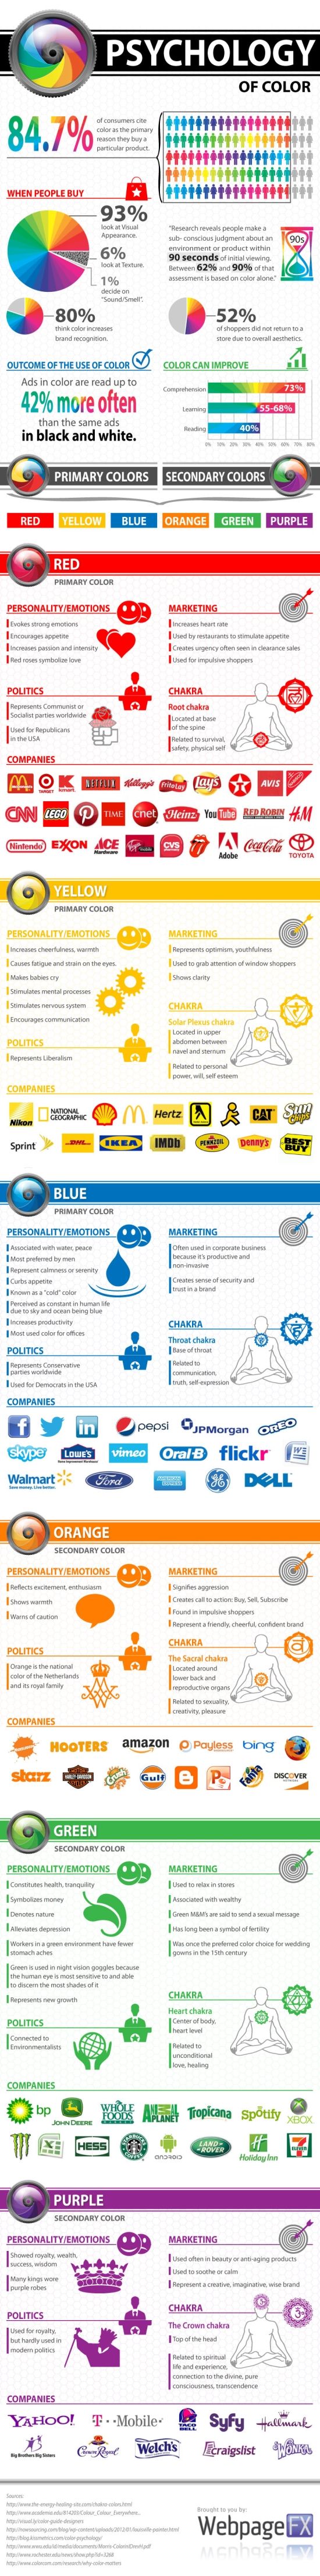 Psychology of Color infographic